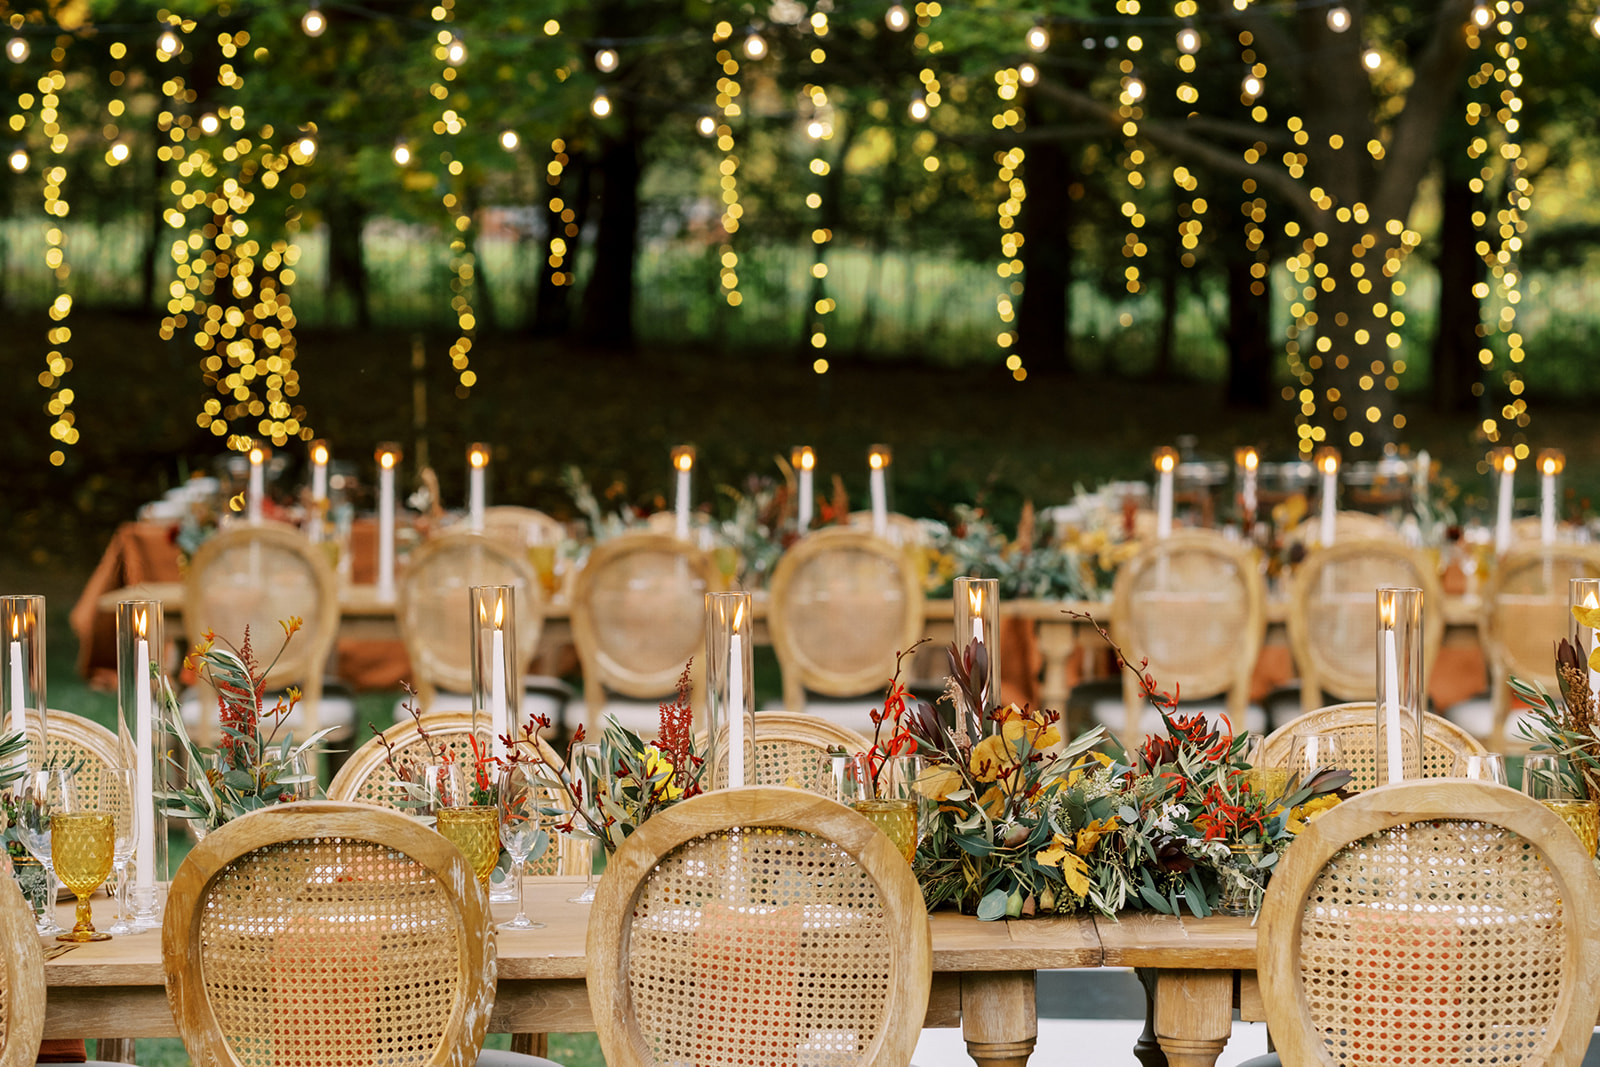 Stunning backyard wedding reception details of table setting with hanging string lights from trees in Maryland